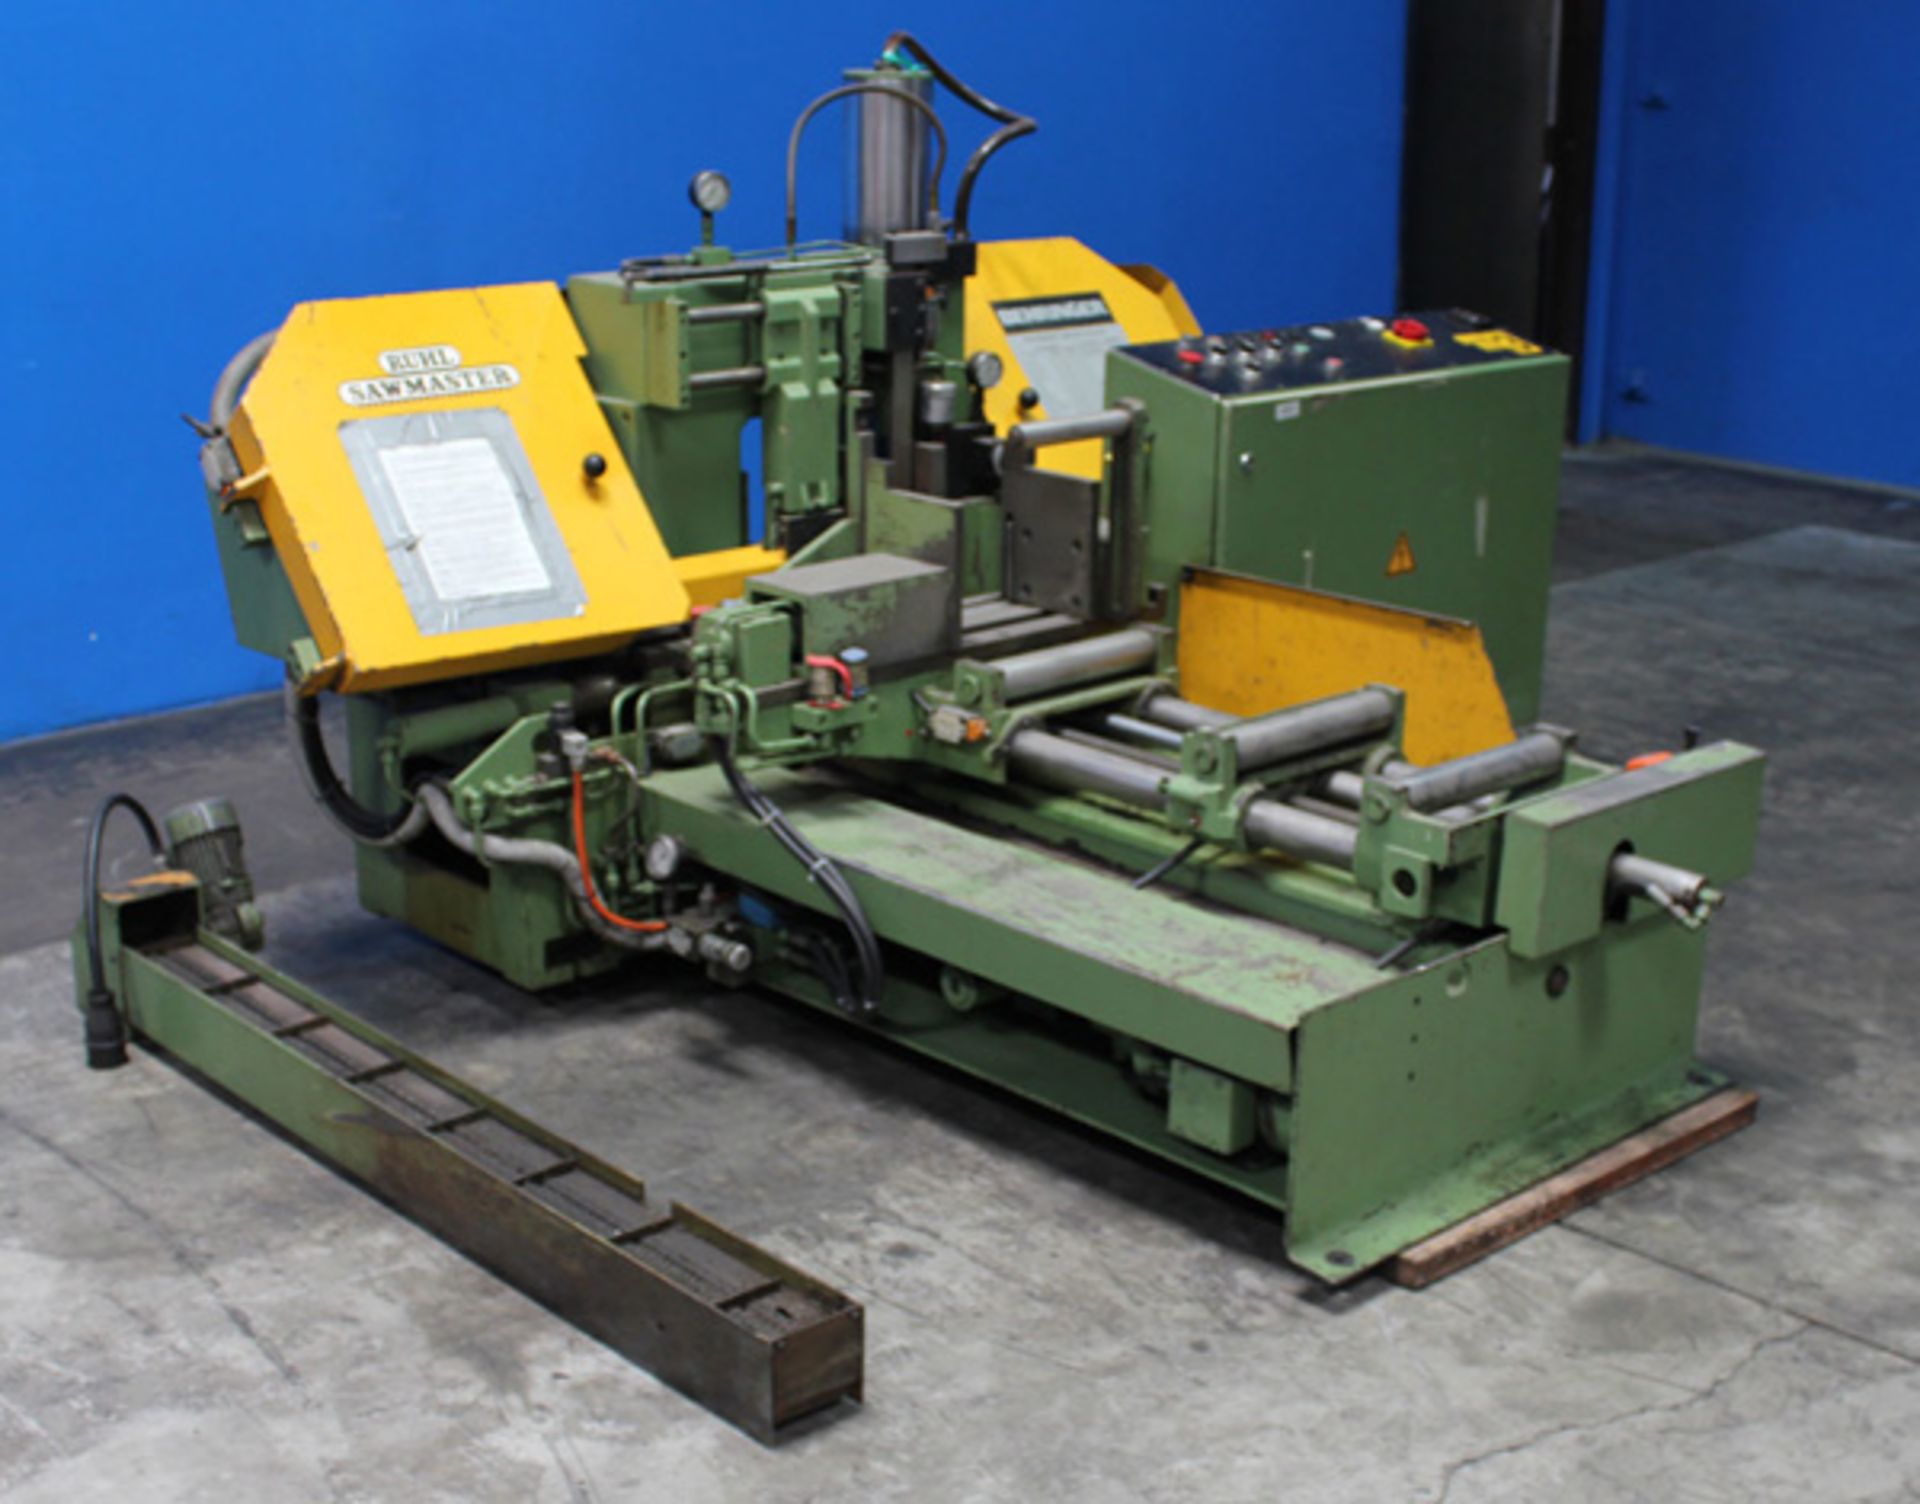 1988 Behringer Automatic Horizontal Band Saw | 11.8" x 10.2", Mdl: HBP260A, S/N: 288604 - 4804HP - Image 3 of 7